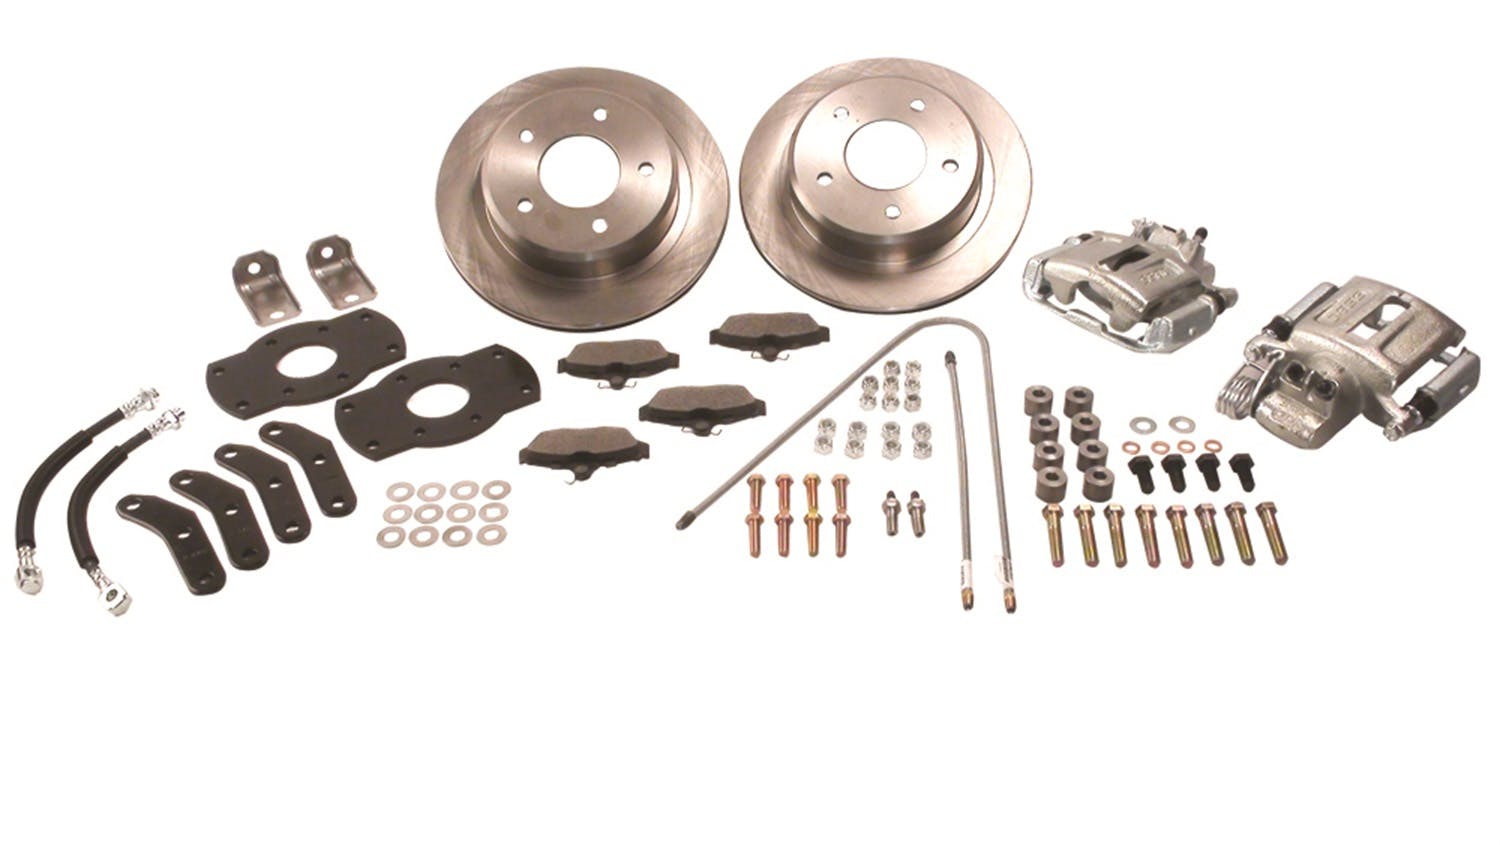 Stainless Steel Brakes A128-4BK Kit A128-4 w/black calipers